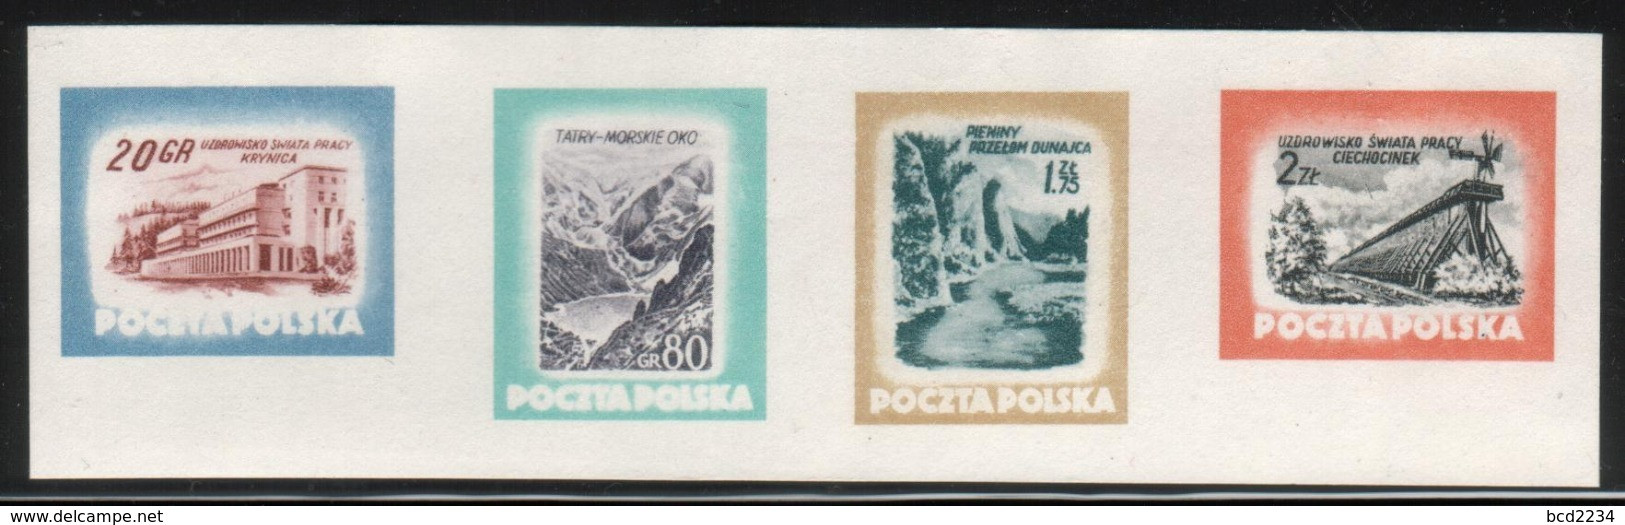 POLAND 1953 TOURISM TOURIST SERIES VIEWS COMPLETE SET IN A STRIP OF COLOUR PROOFS NHM Mountains Lakes Health Spa Resorts - Proofs & Reprints